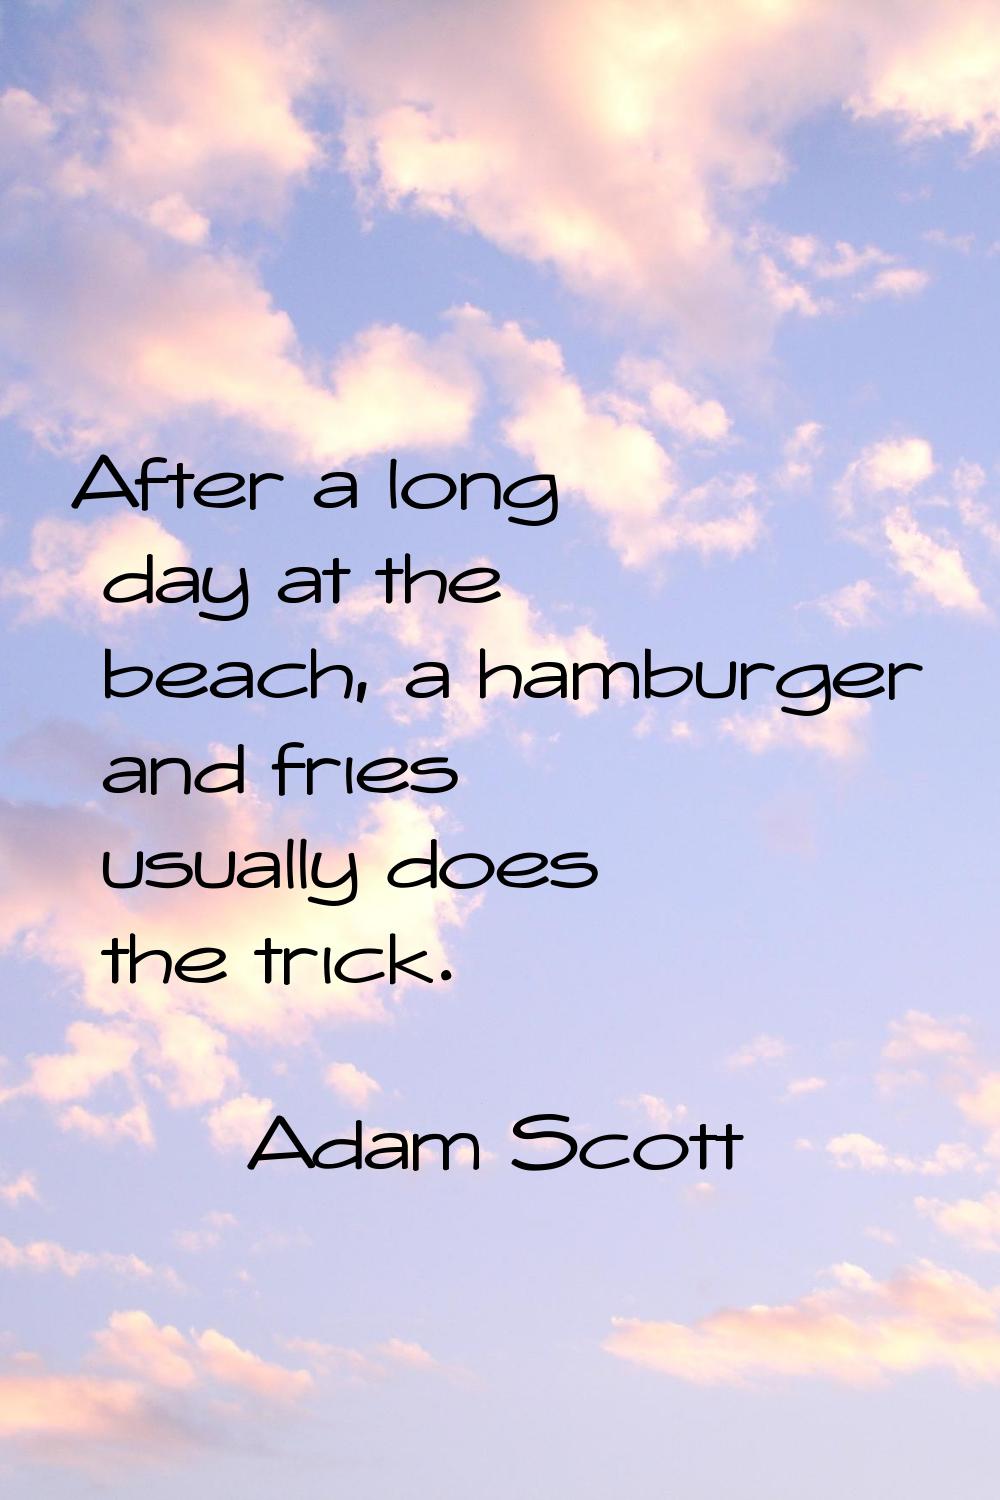 After a long day at the beach, a hamburger and fries usually does the trick.